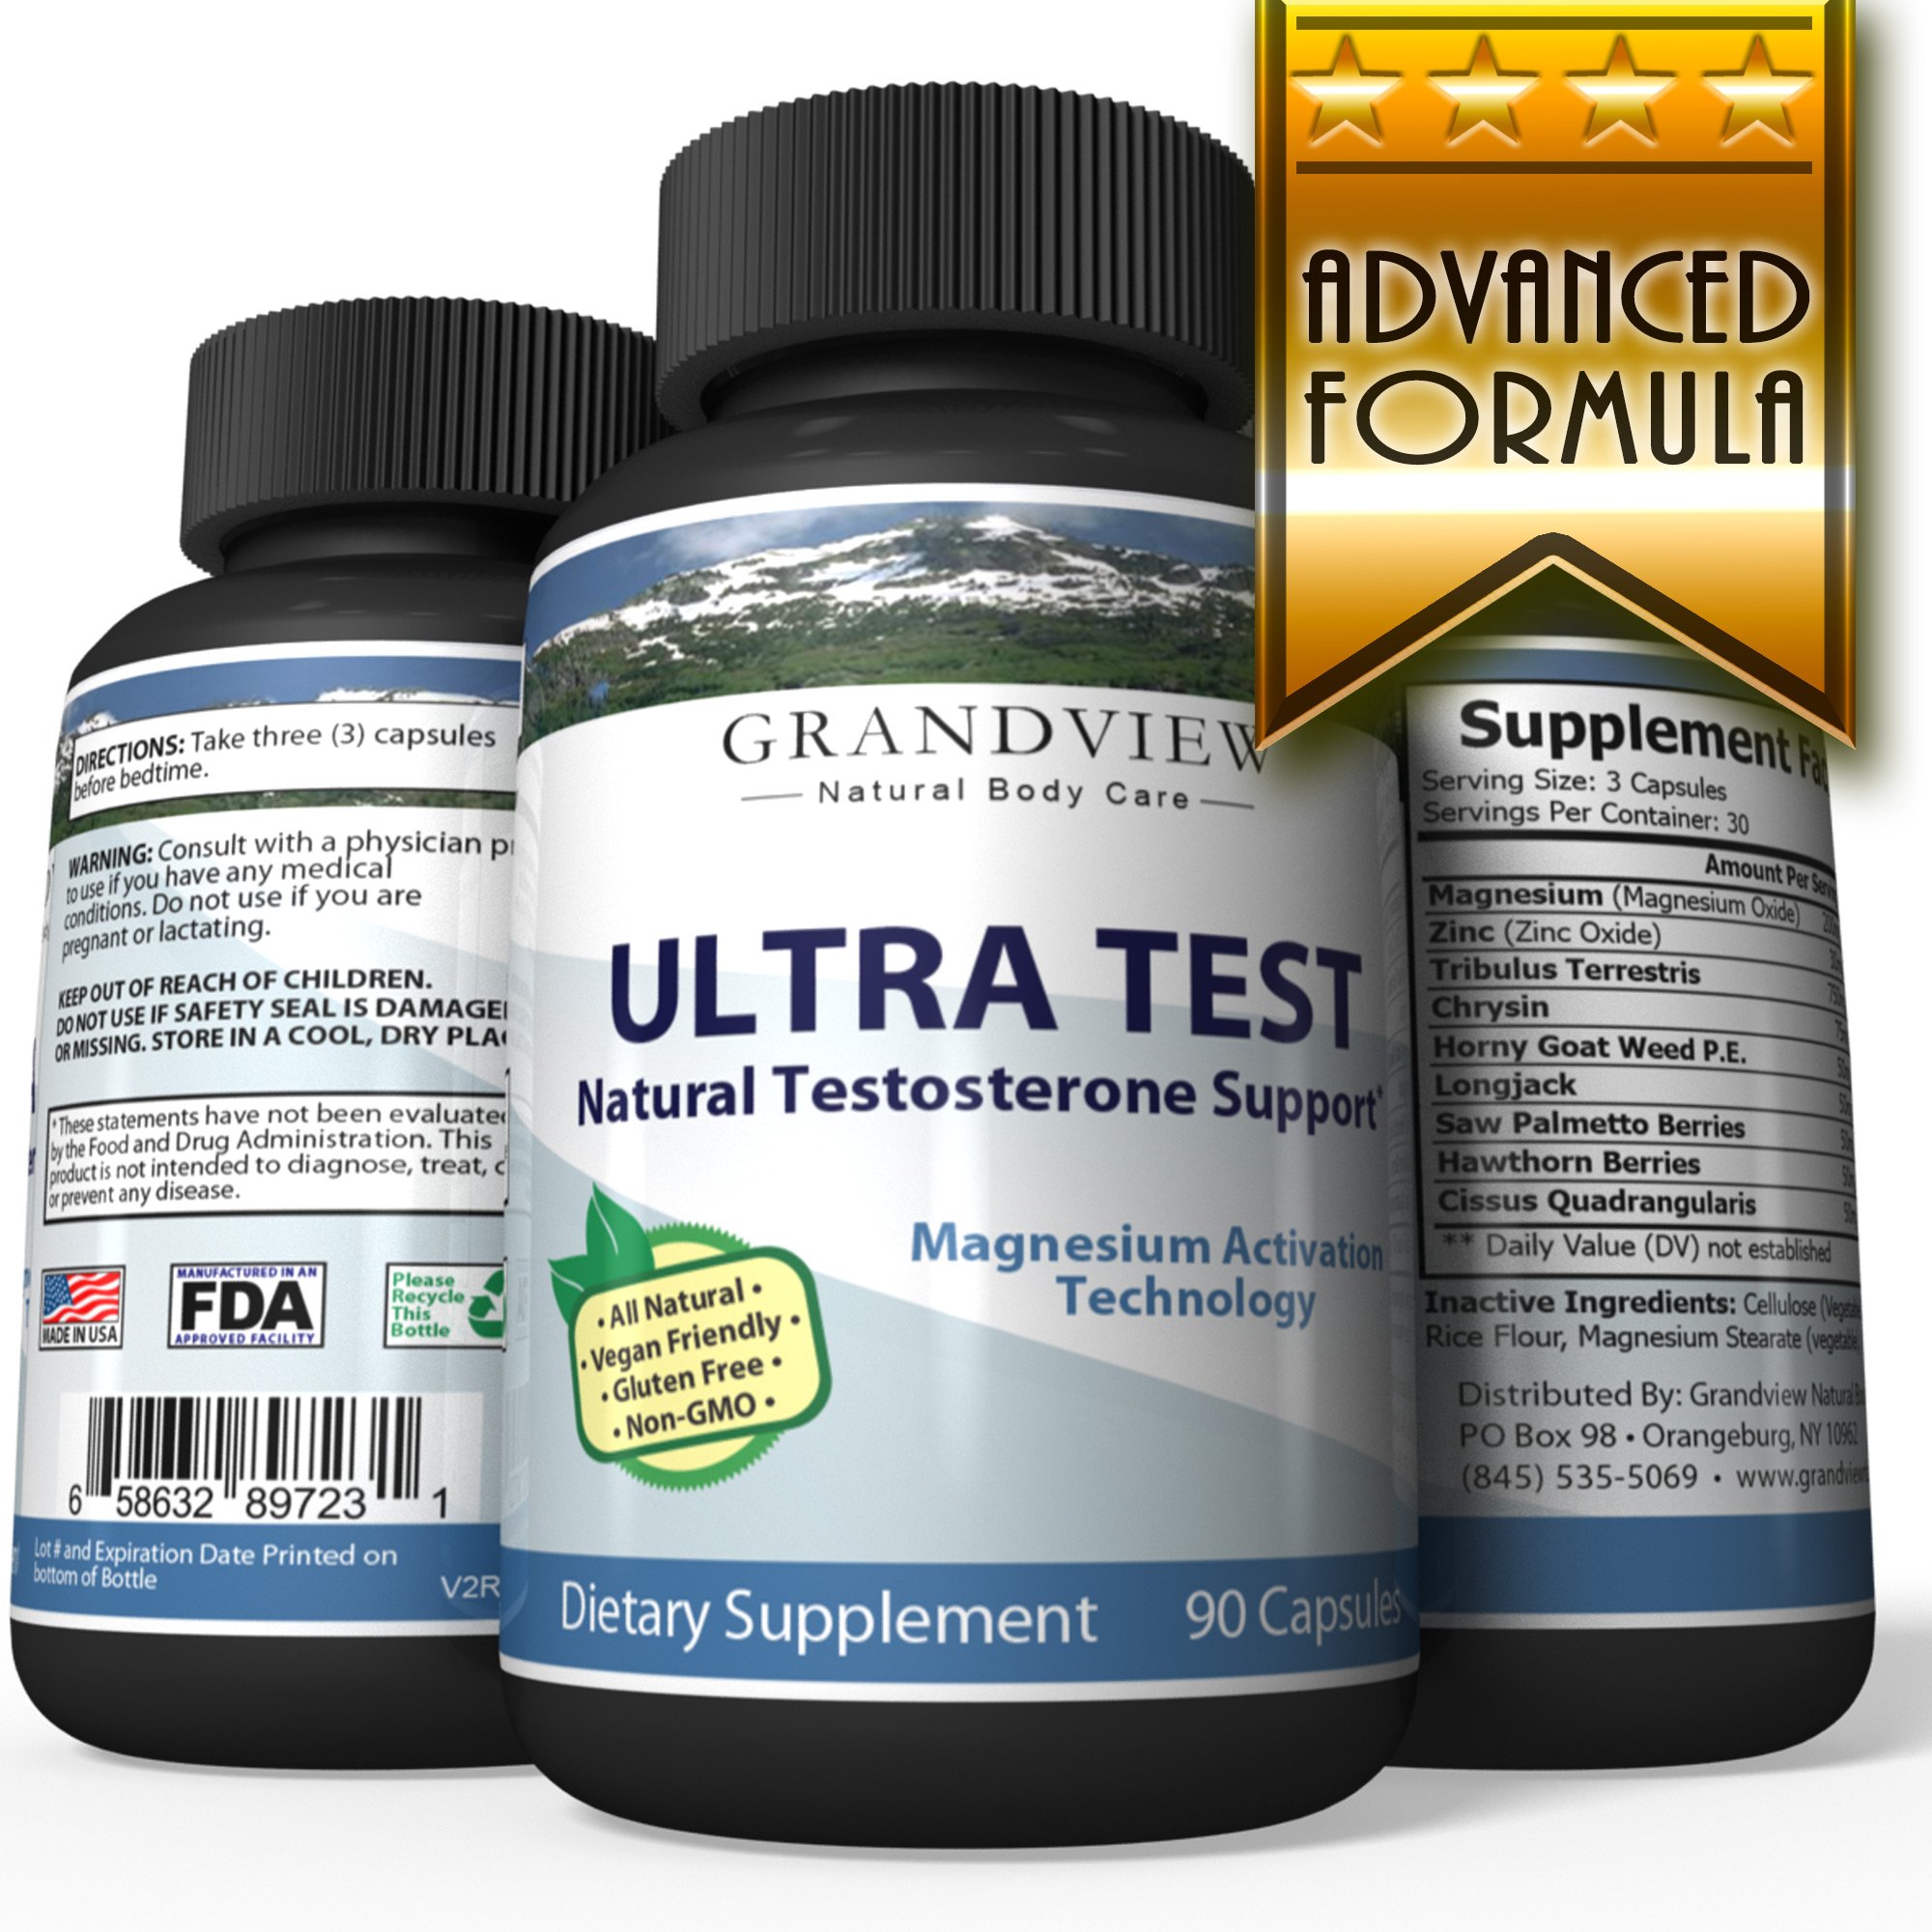 Natural UltraTest Testosterone Booster - All Natural, Drug Free ...